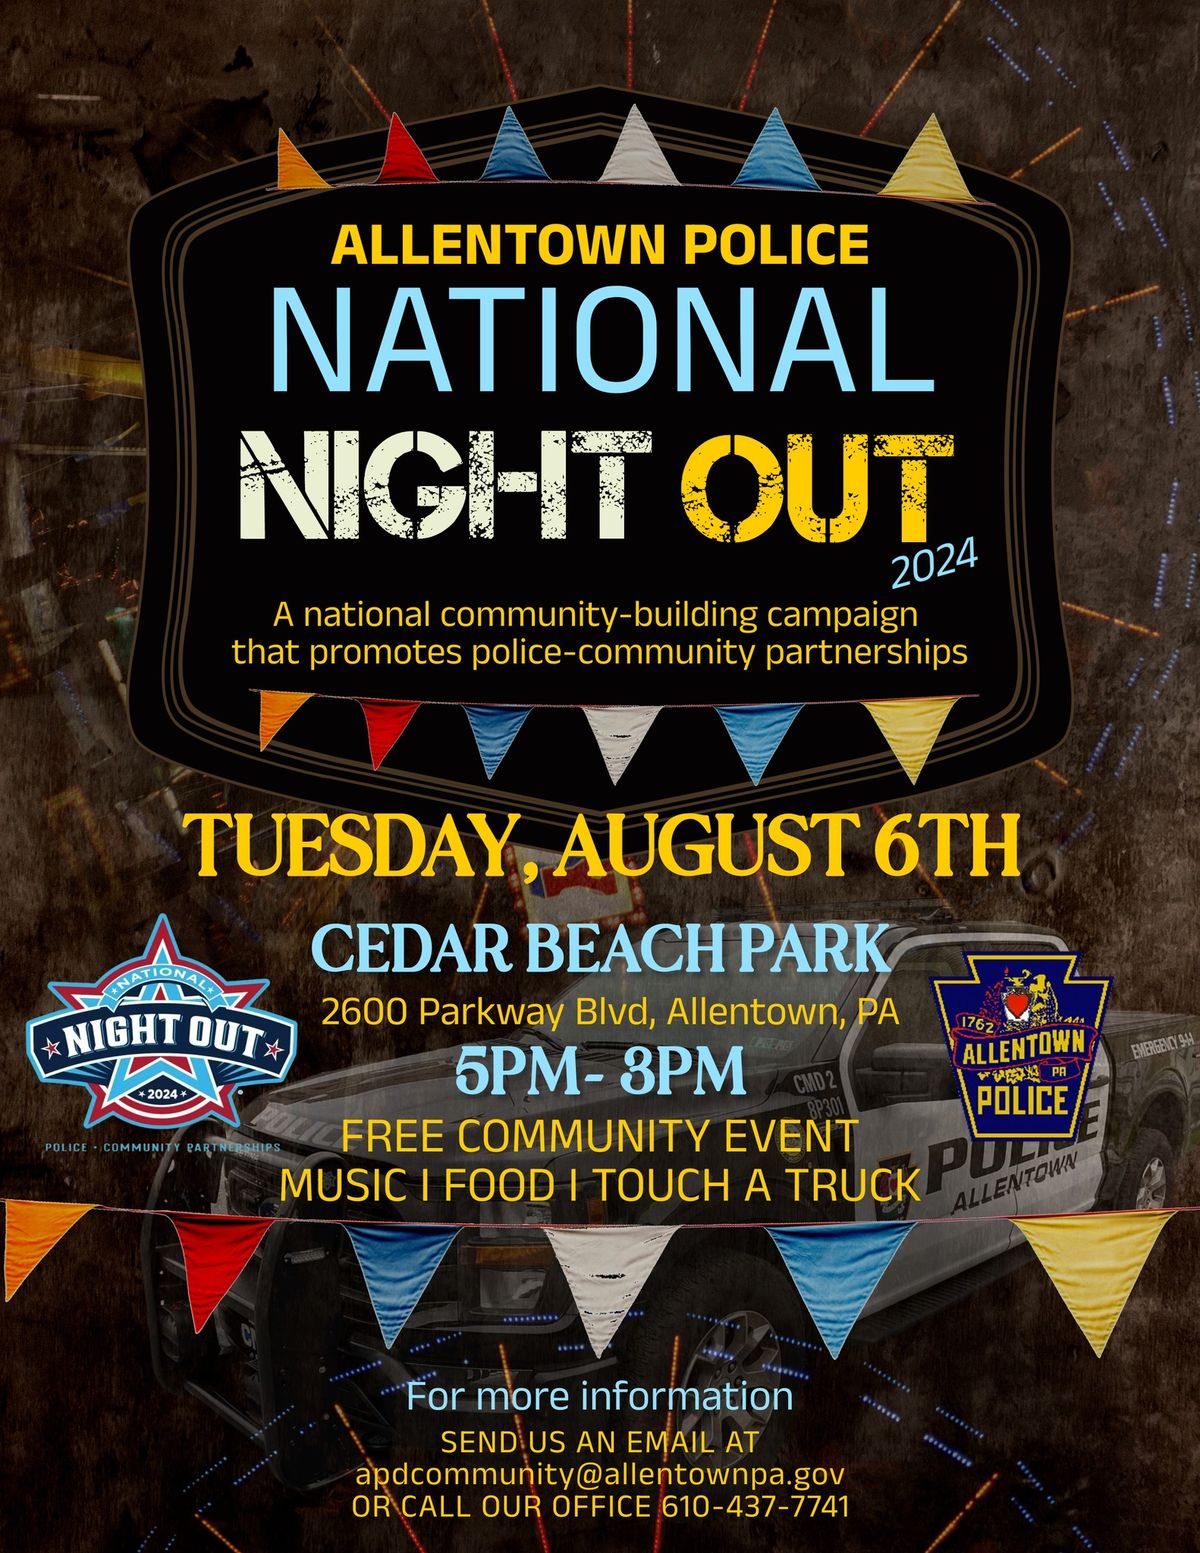 NATIONAL NIGHT OUT WITH ALLENTOWN POLICE 